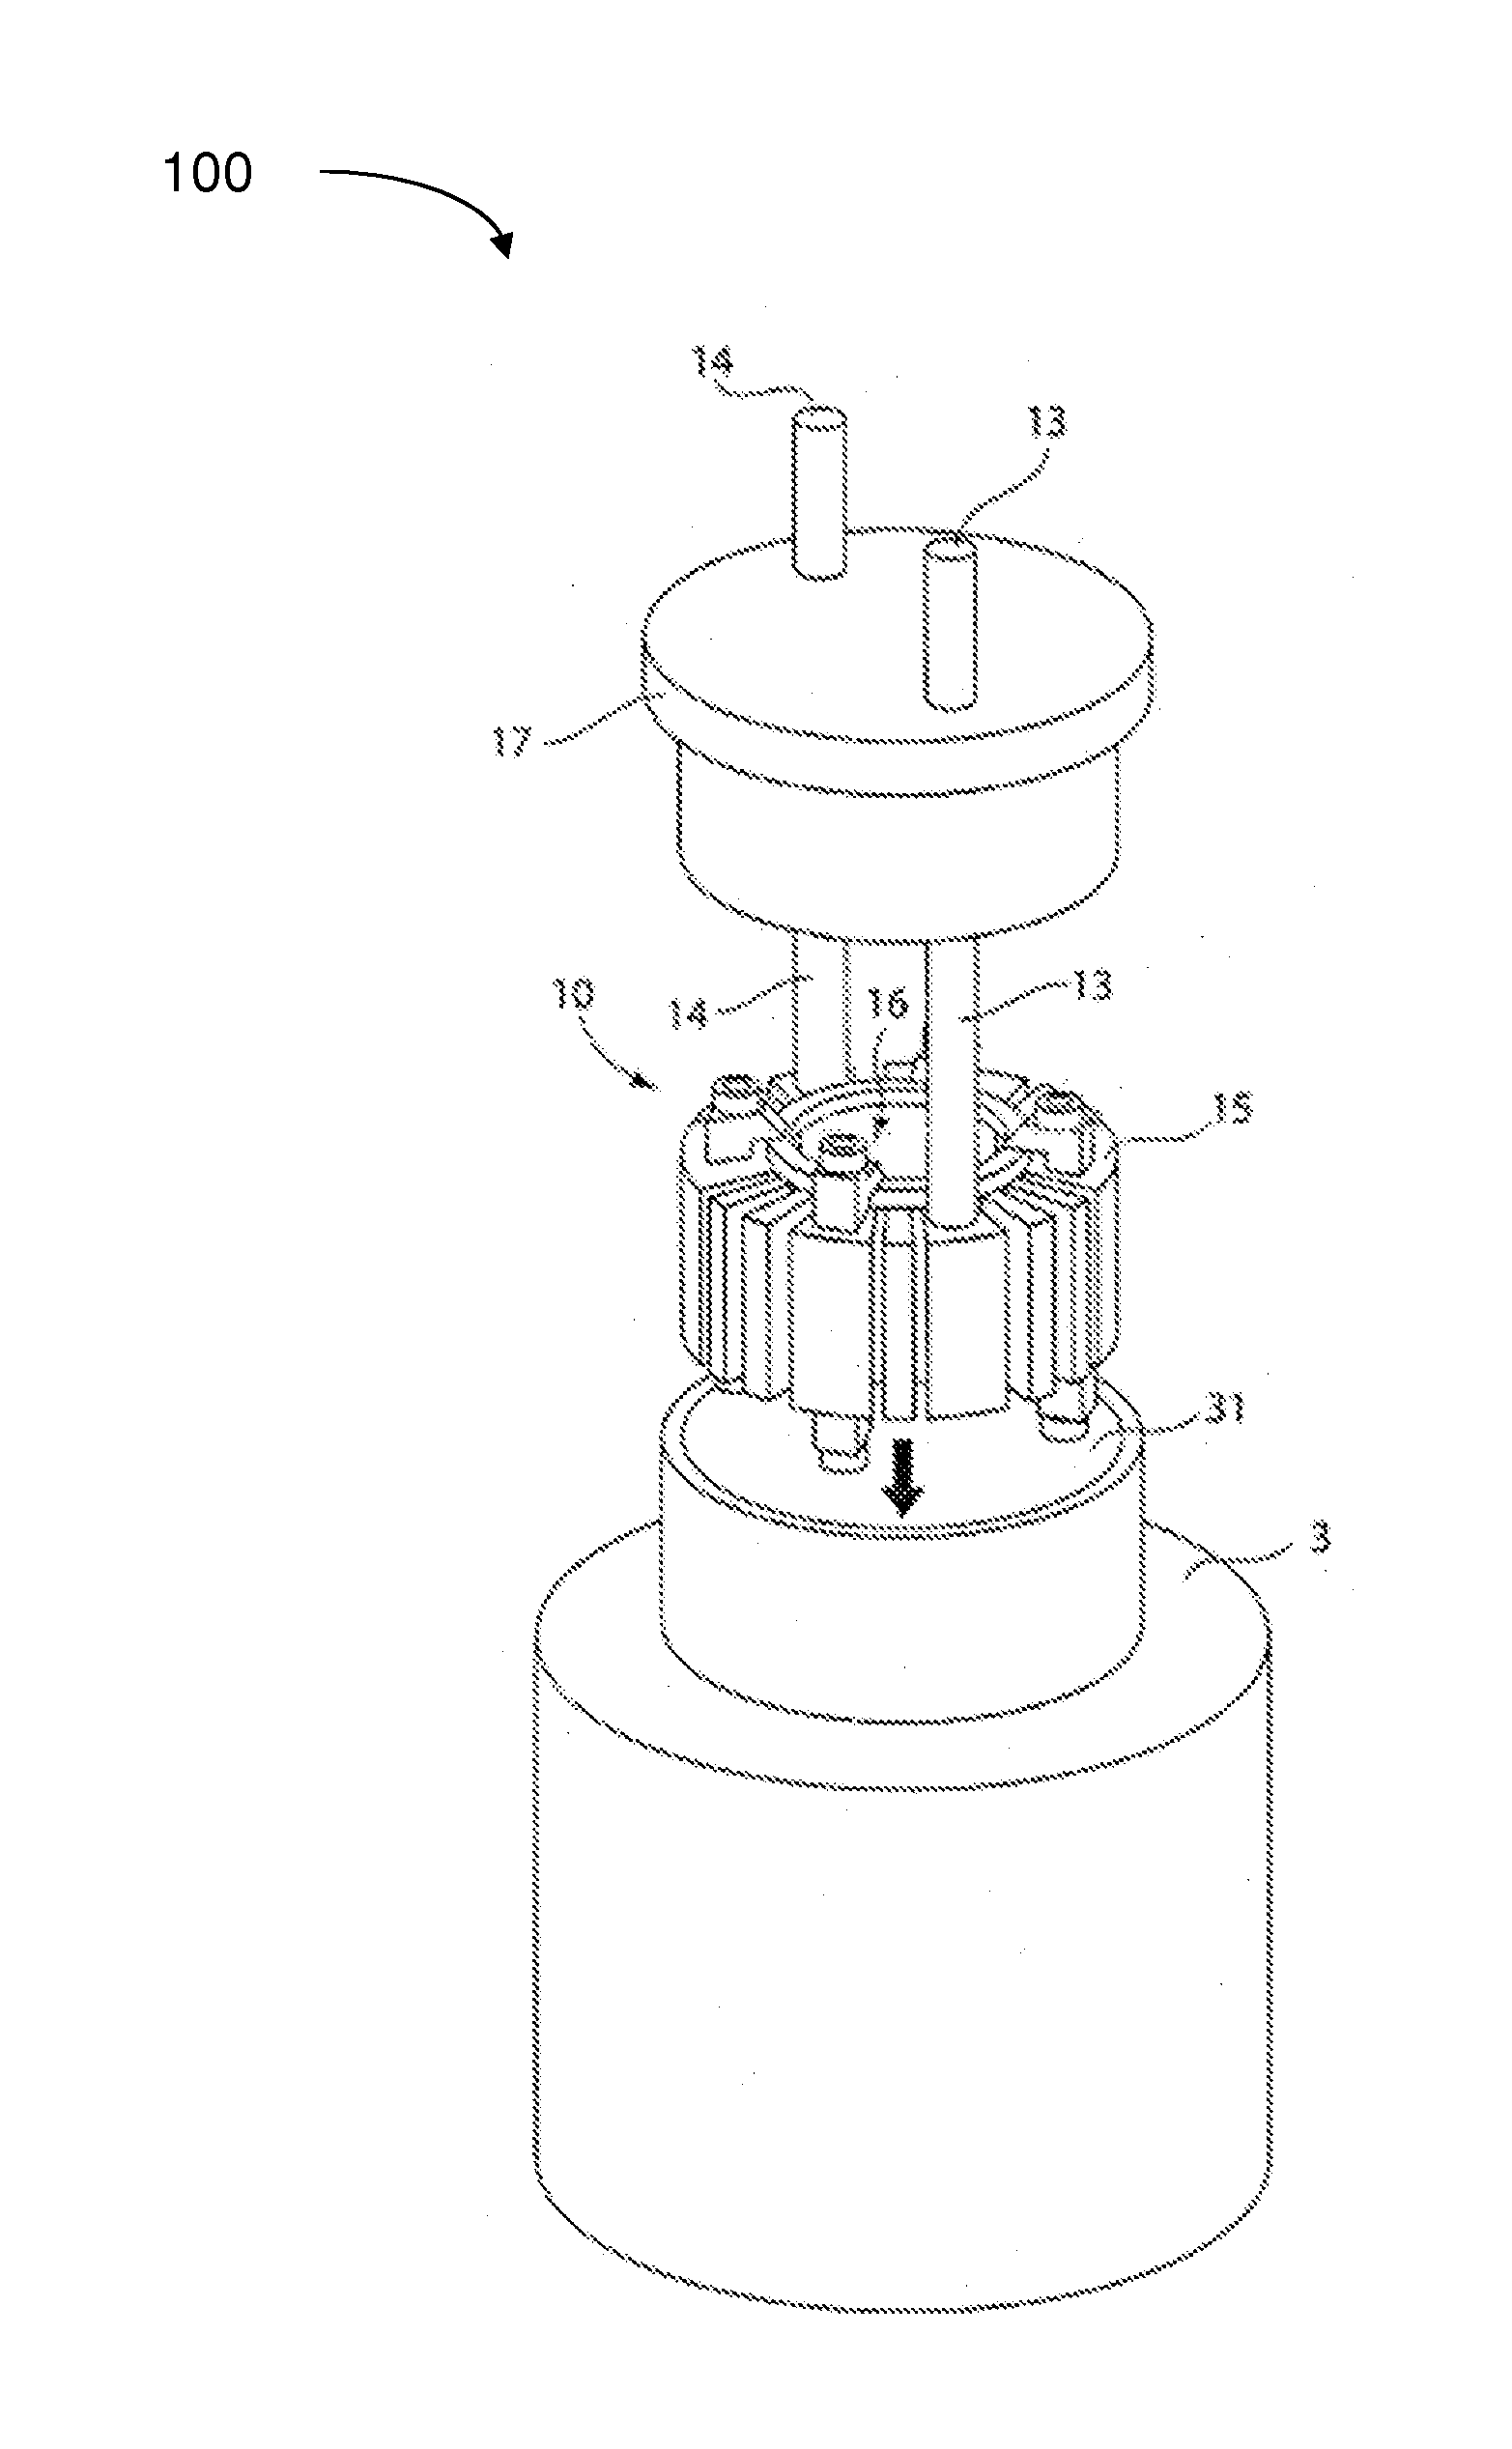 Method and apparatus for processing sample material